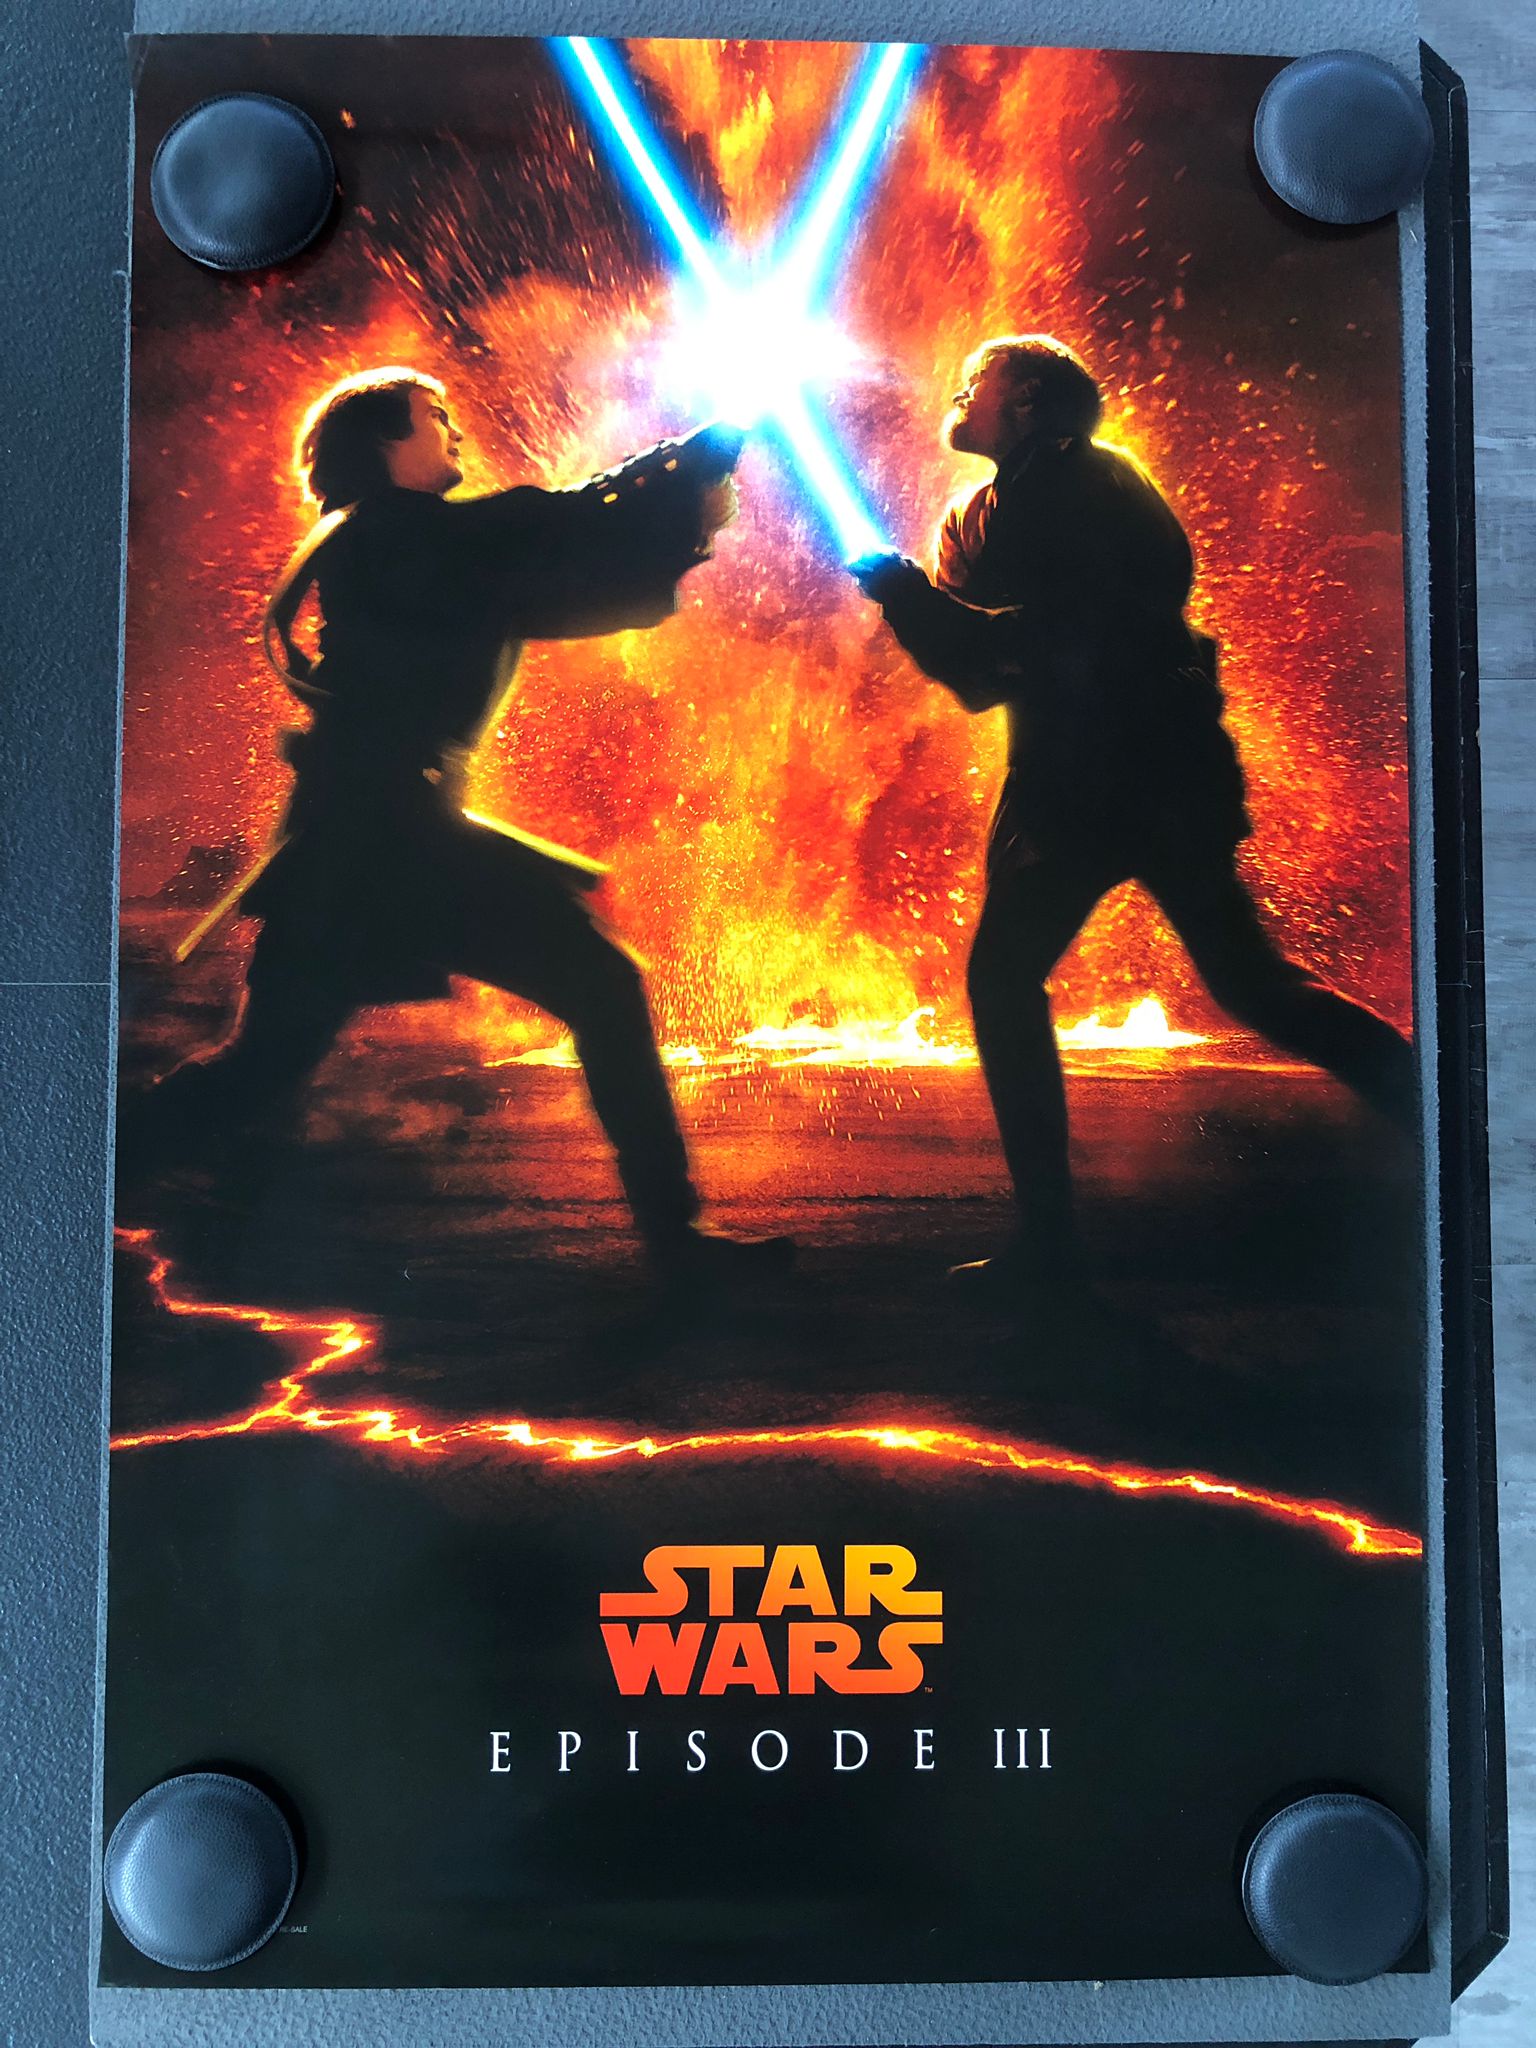 Star Wars Episode III Revenge of the Sith Poster 24x36